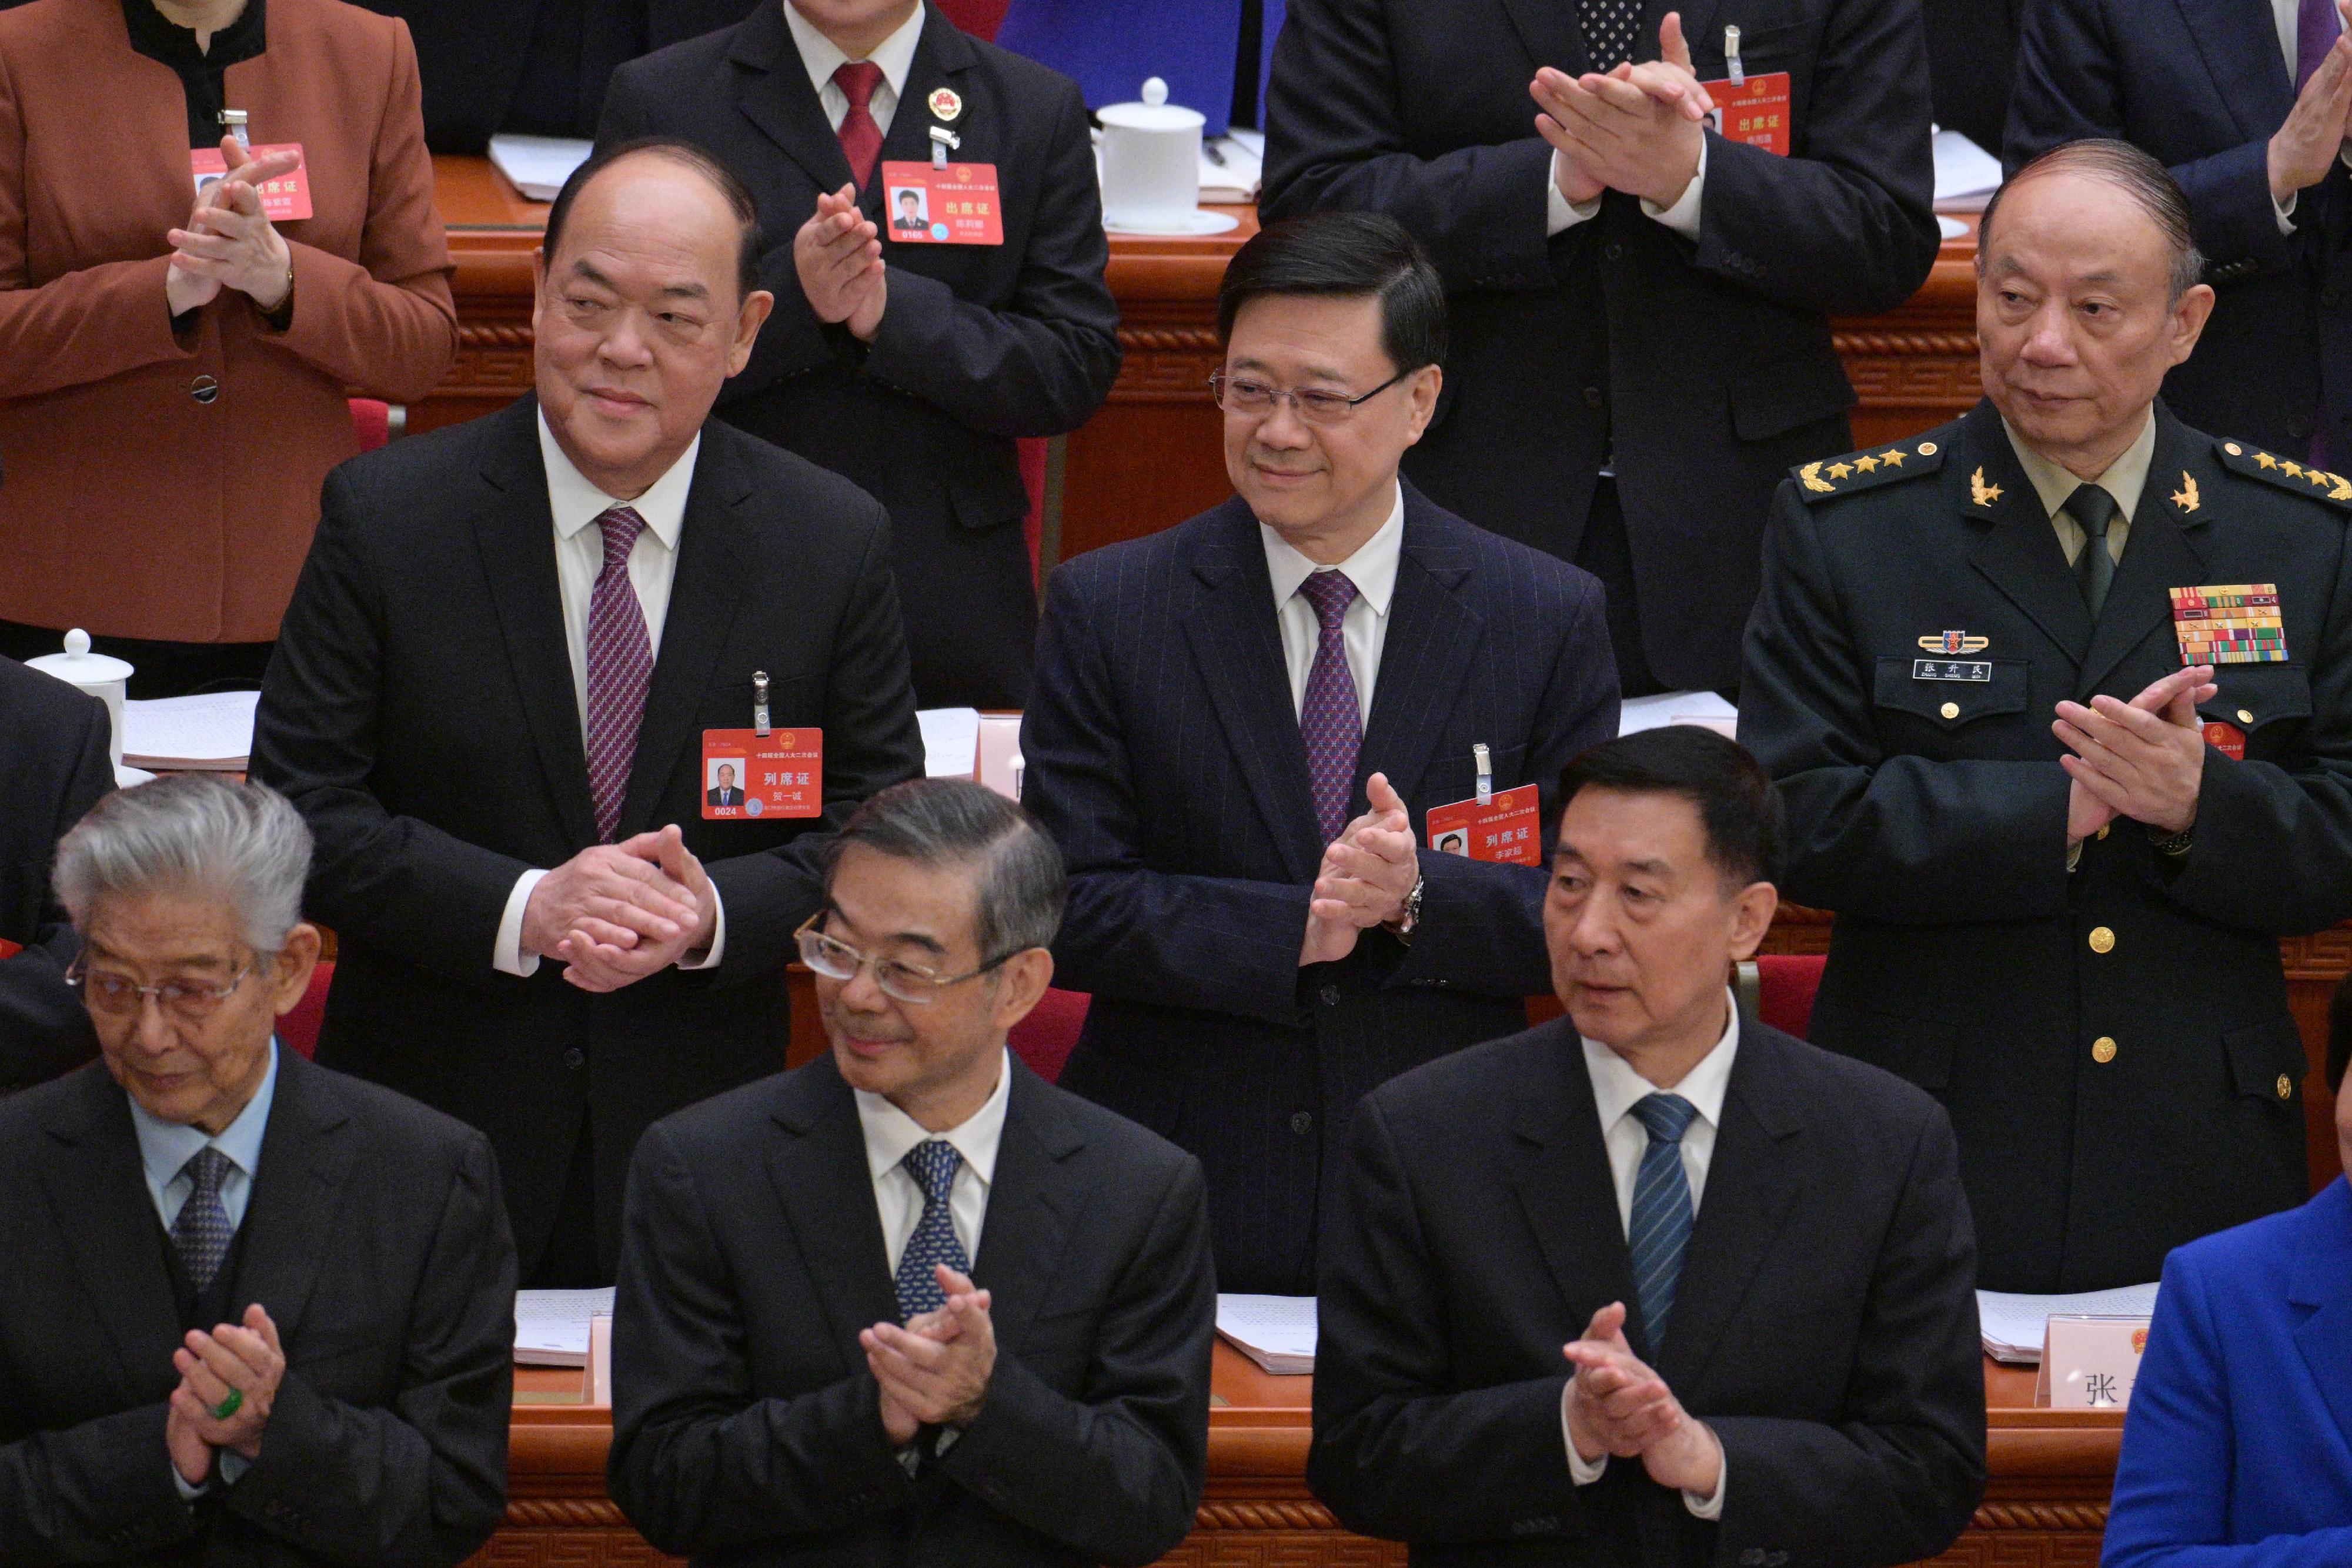 The Chief Executive, Mr John Lee (second row, centre), attends the opening meeting of the second annual session of the 14th National People's Congress in Beijing this morning (March 5).